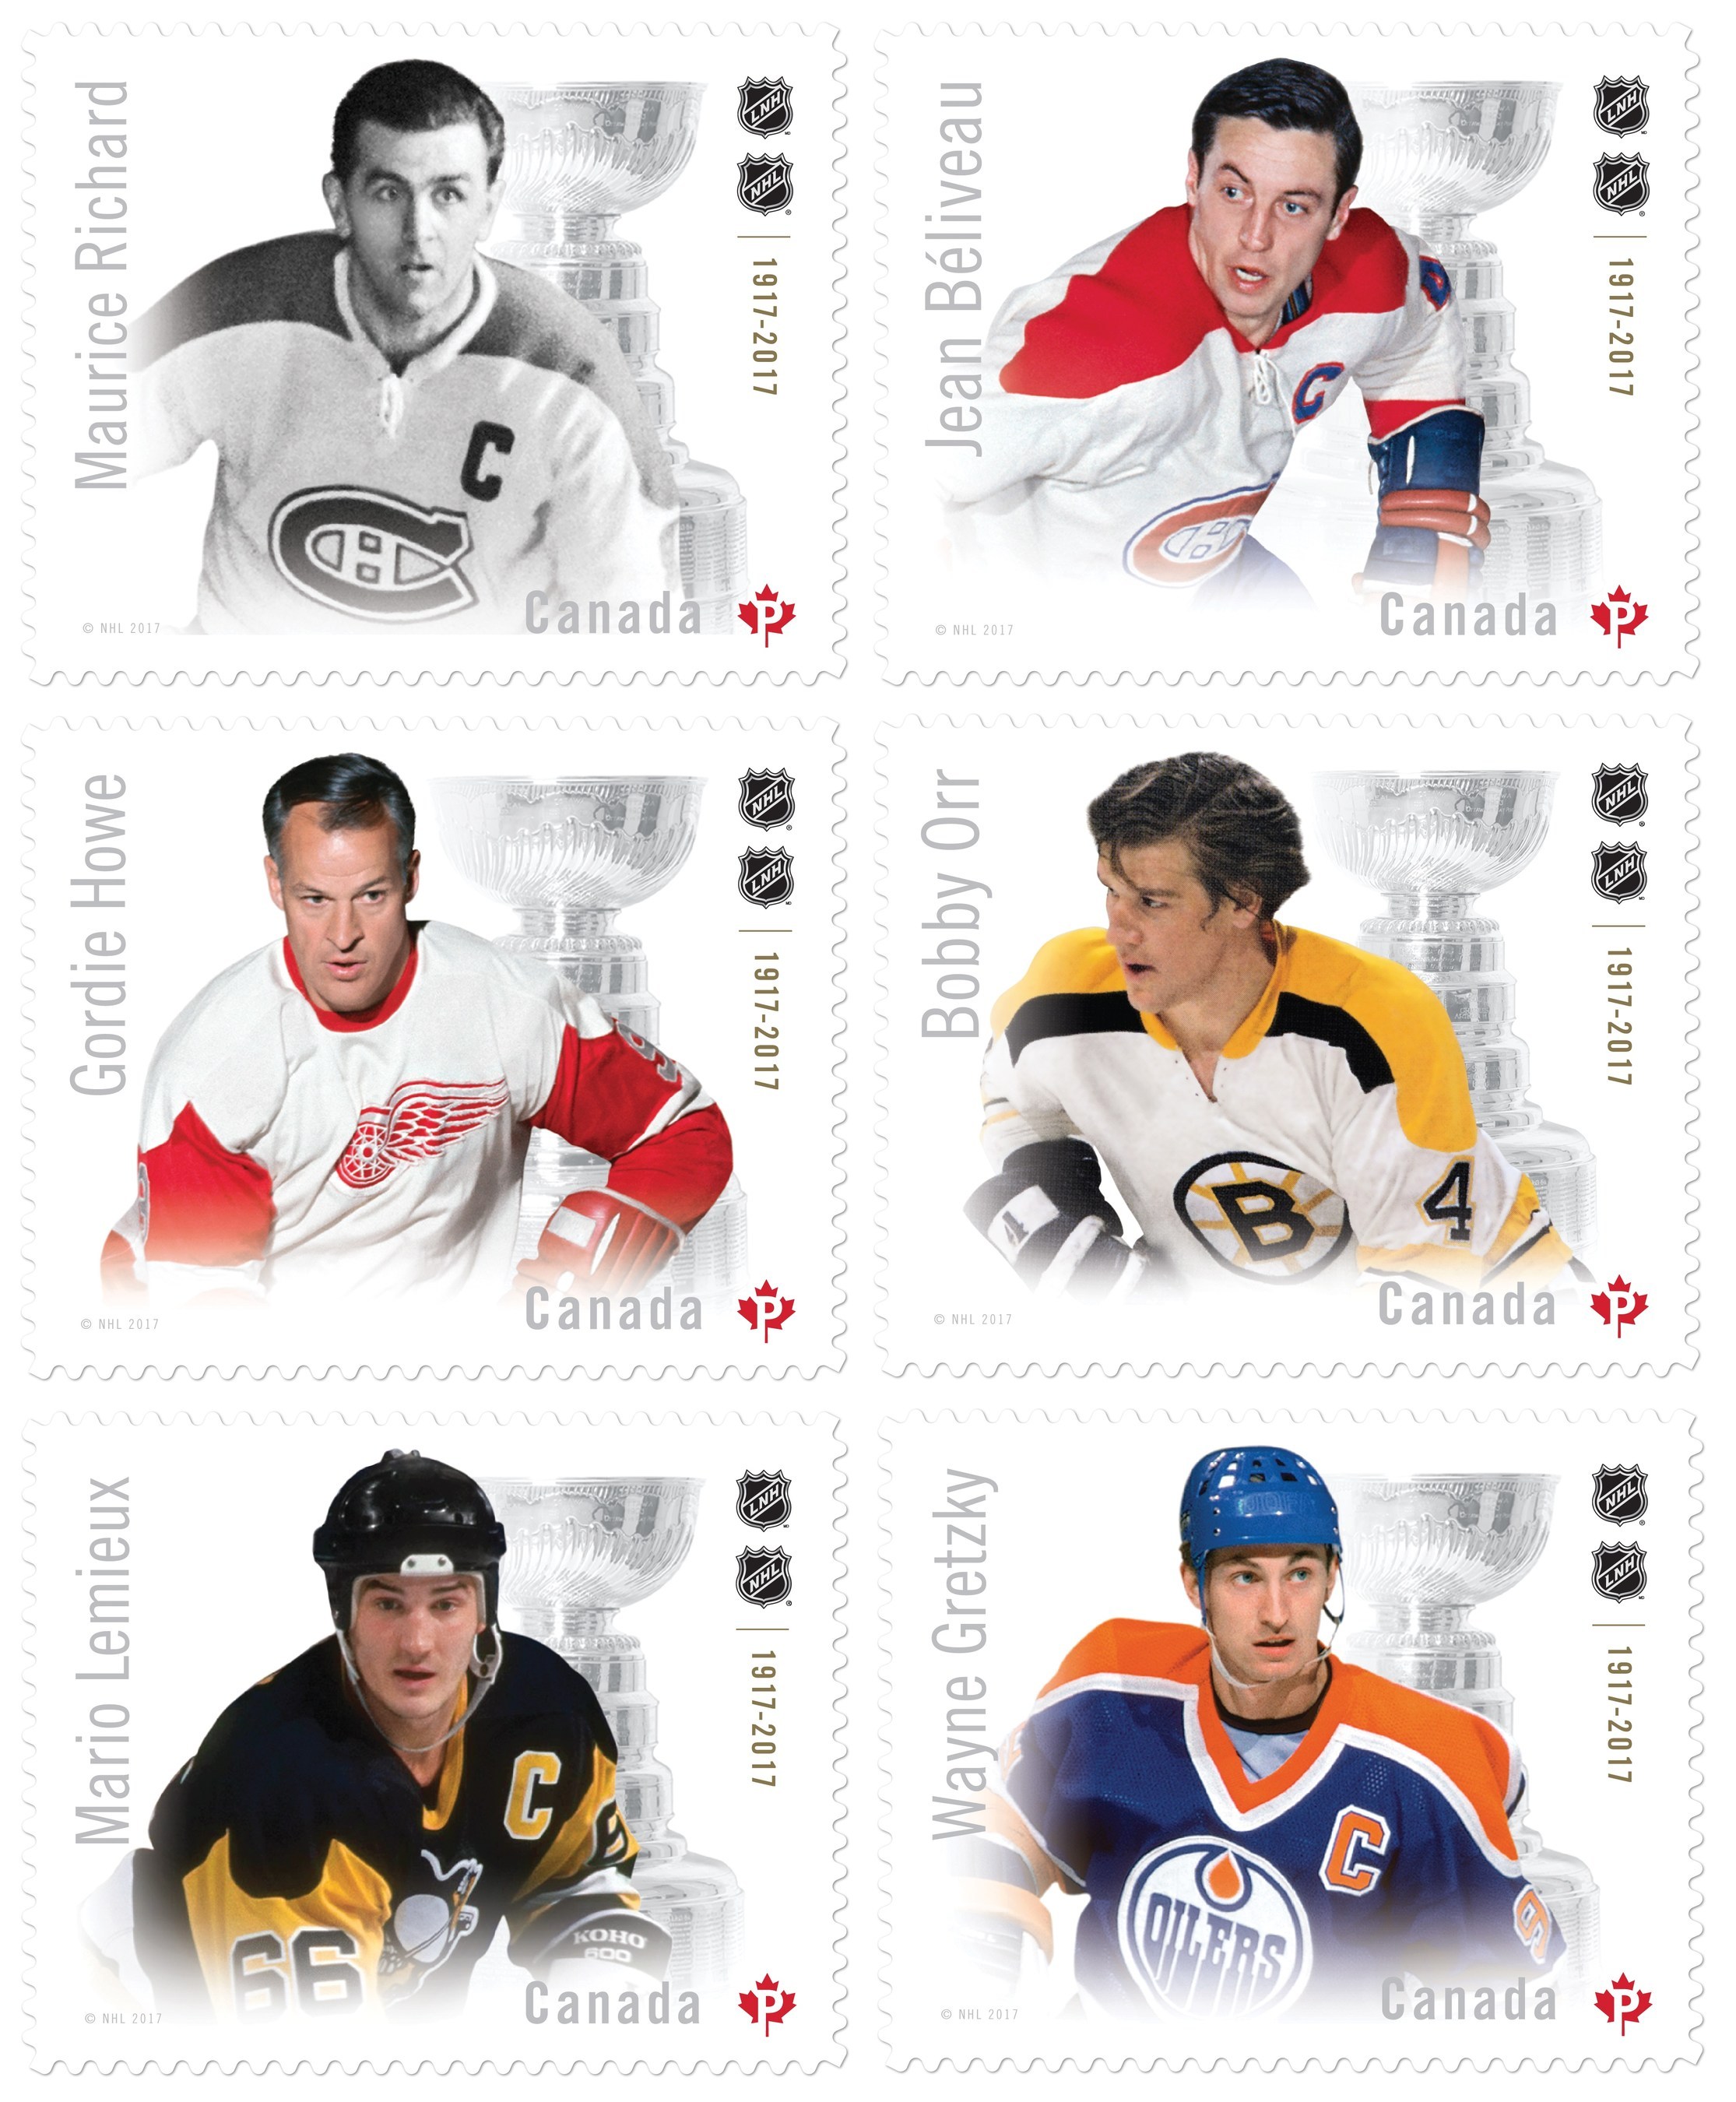 Canada Post-Canadian Hockey Legends stamps immortalize the best